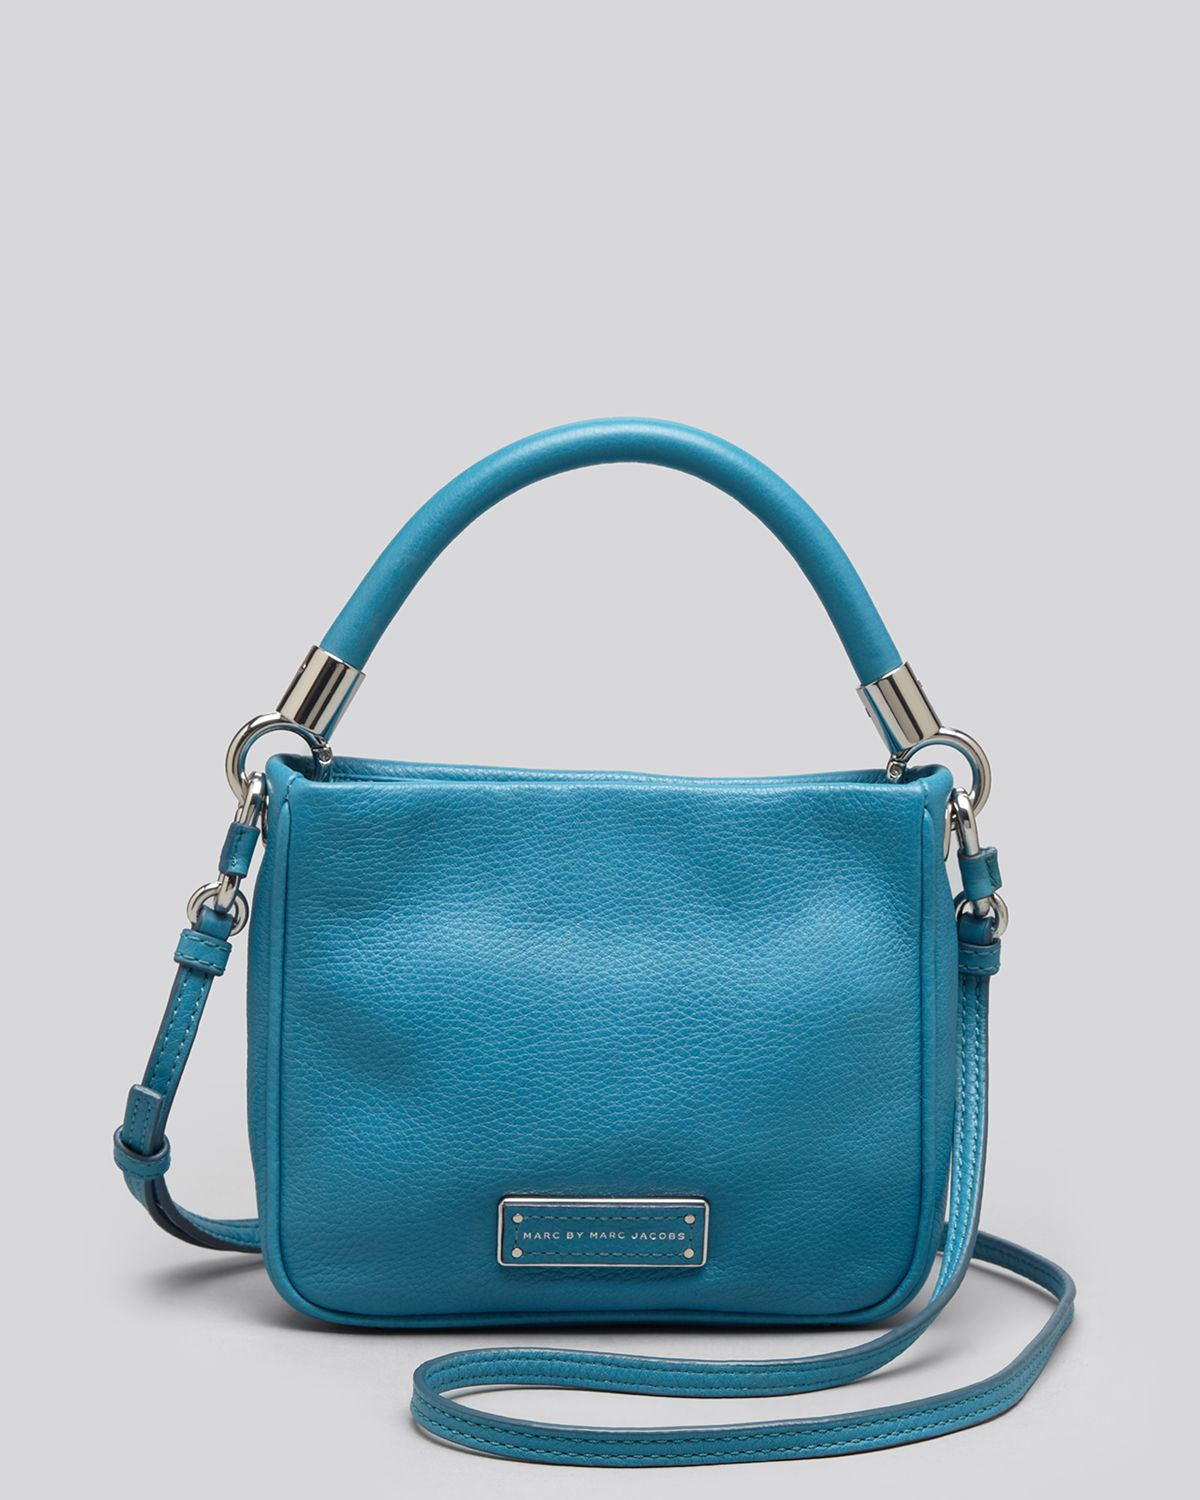 Marc By Marc Jacobs Crossbody - Too Hot To Handle Hoctor Mini Bag in Blue - Lyst